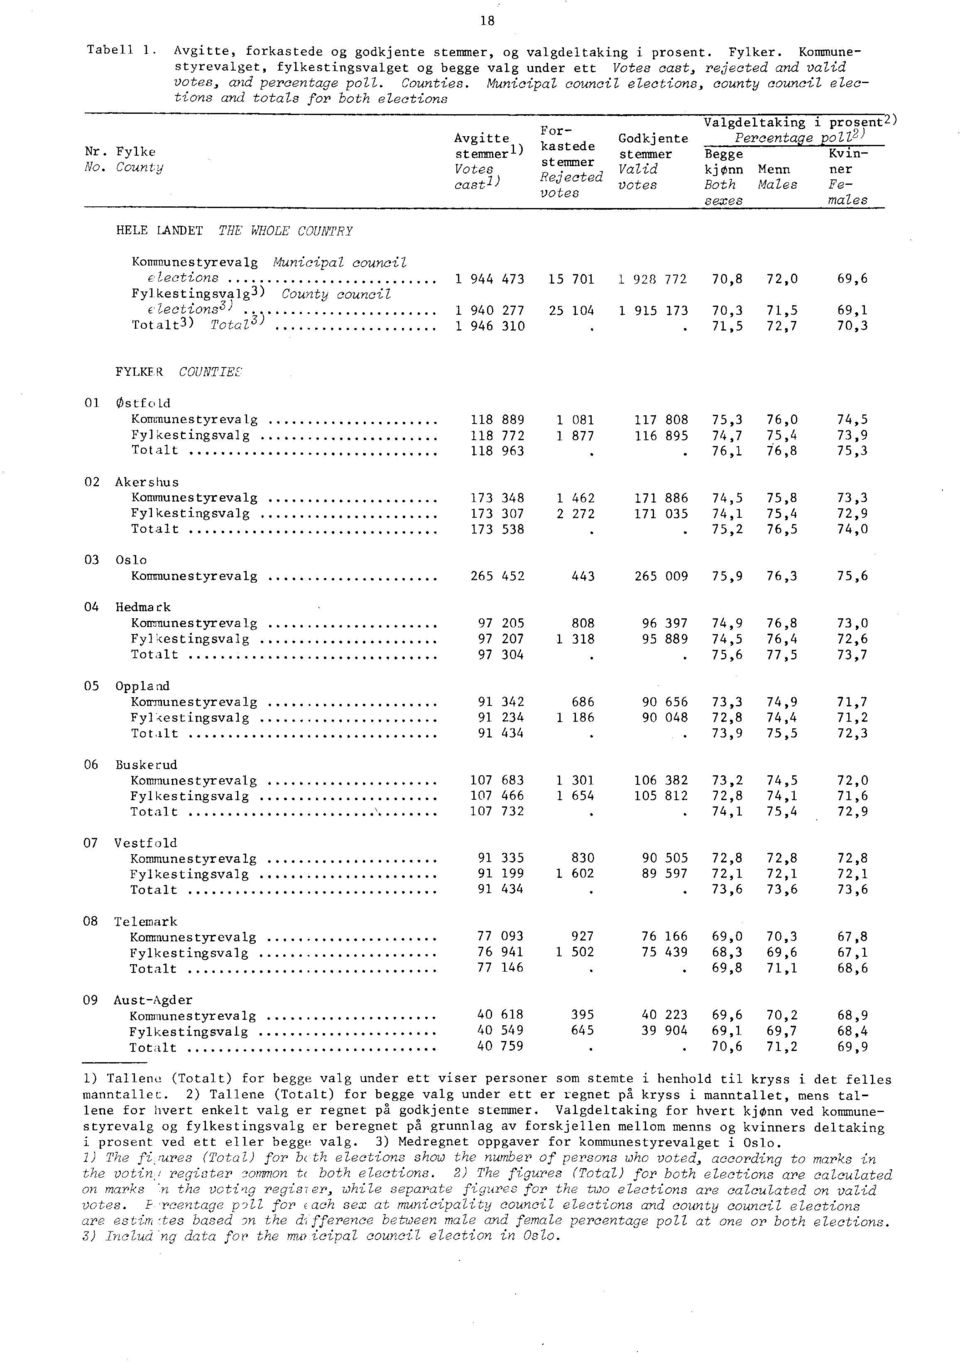 Municipal council elections, county council elections and totals for both elections Nr. Fylke No.